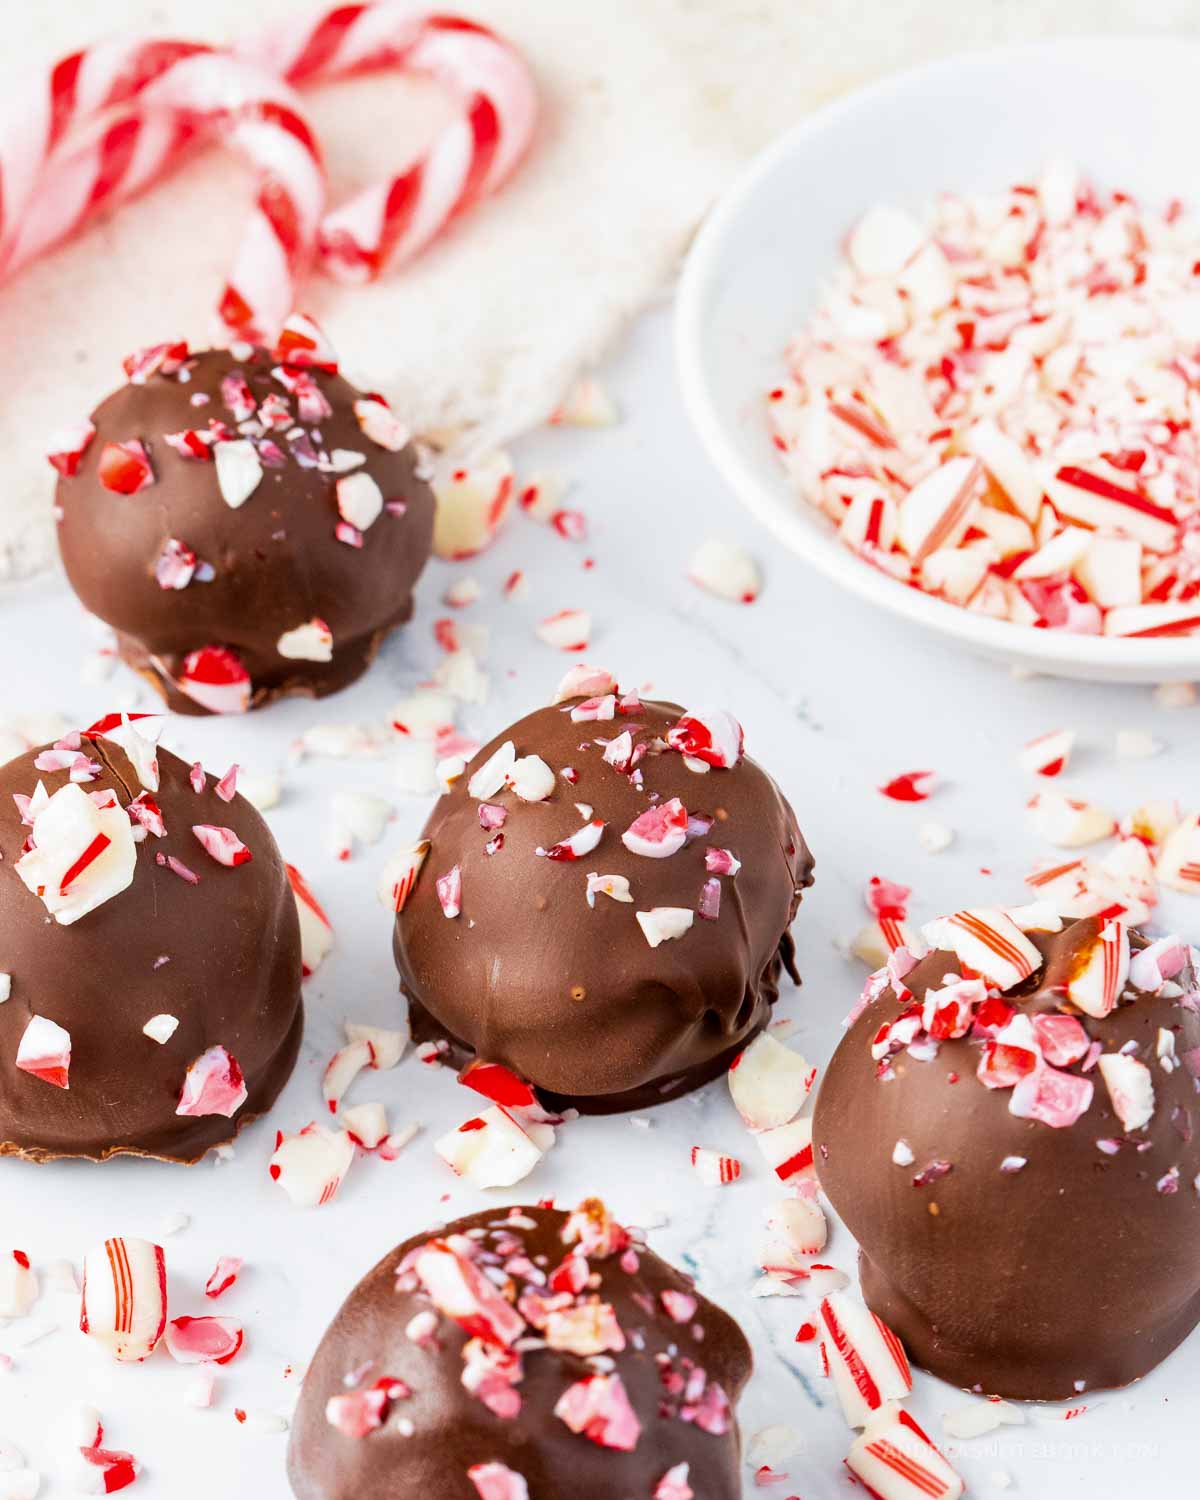 Candy cane pieces on top of chocolate peppermint truffles.